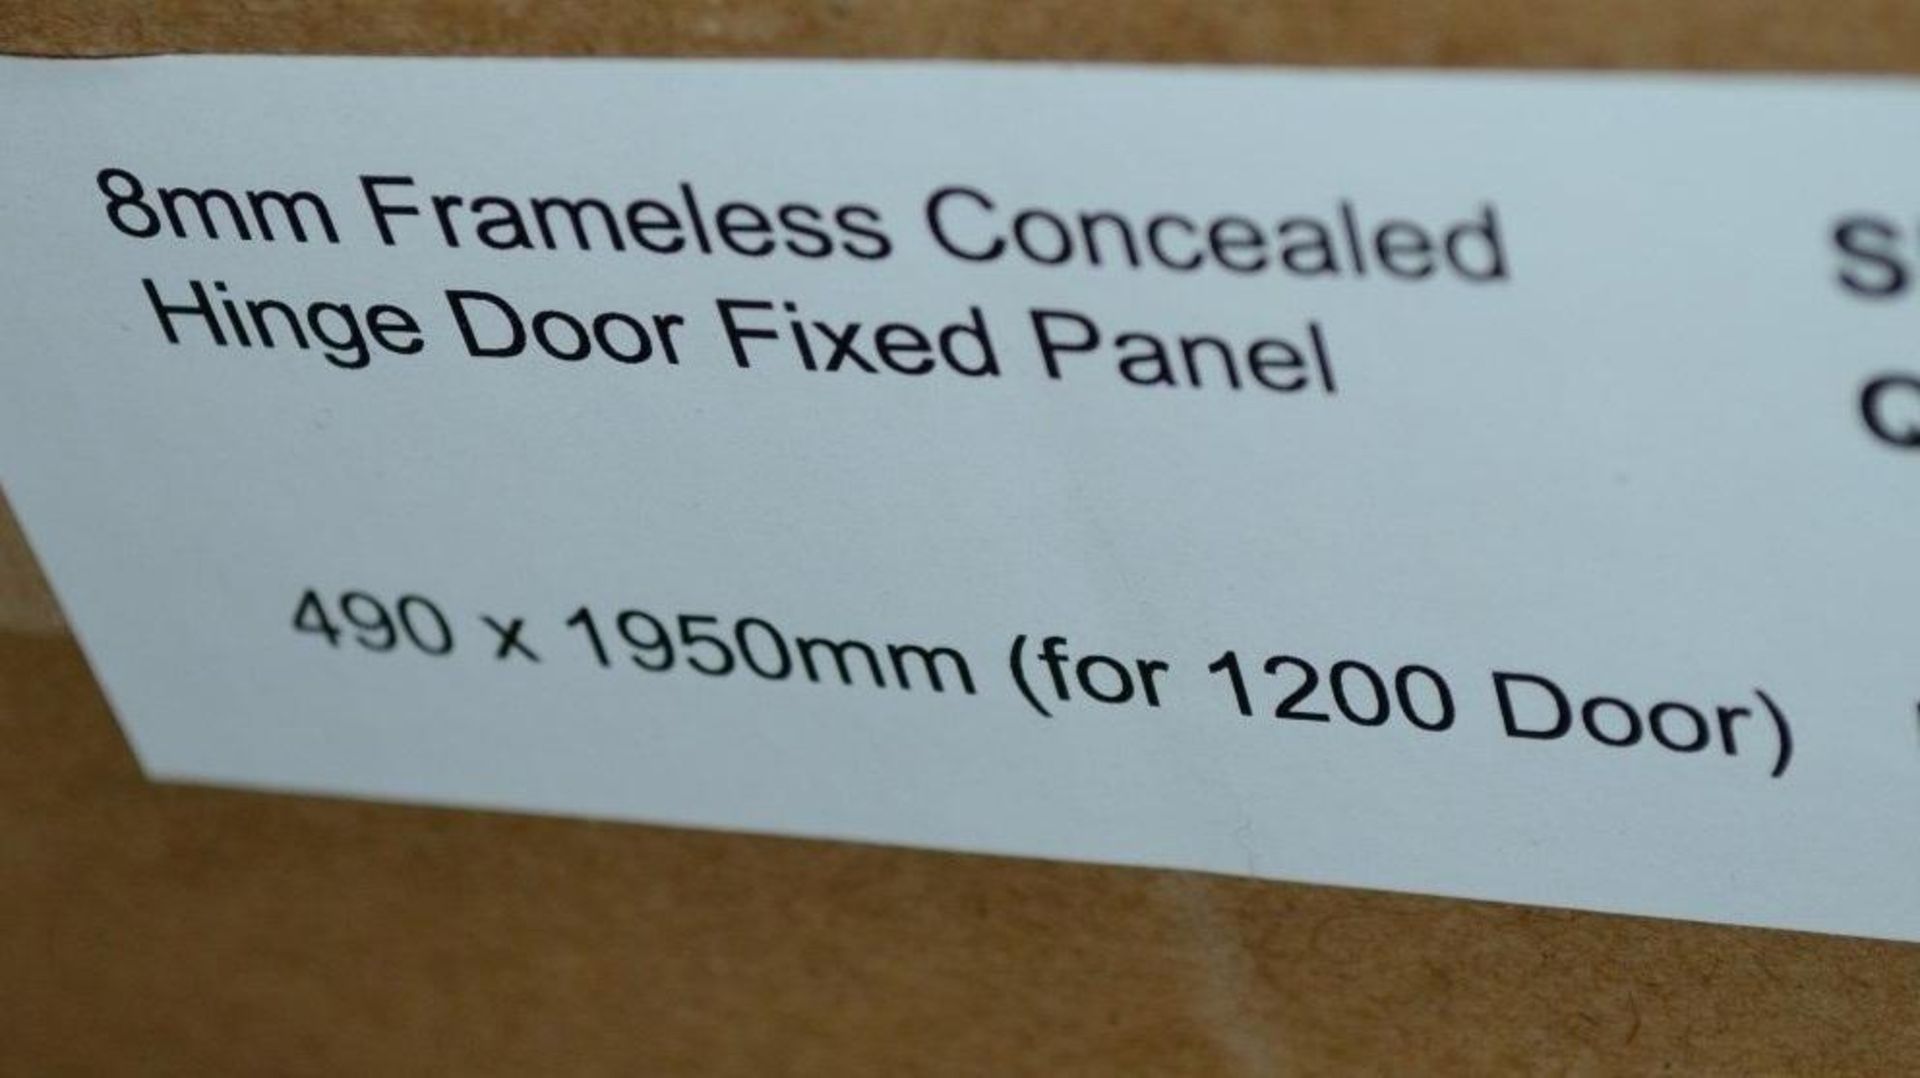 1 x 8mm Frameless Door Fixed Panel - Dimensions: 490 x 1950mm - Made For A 1200 Door (Not Supplied) - Image 2 of 2